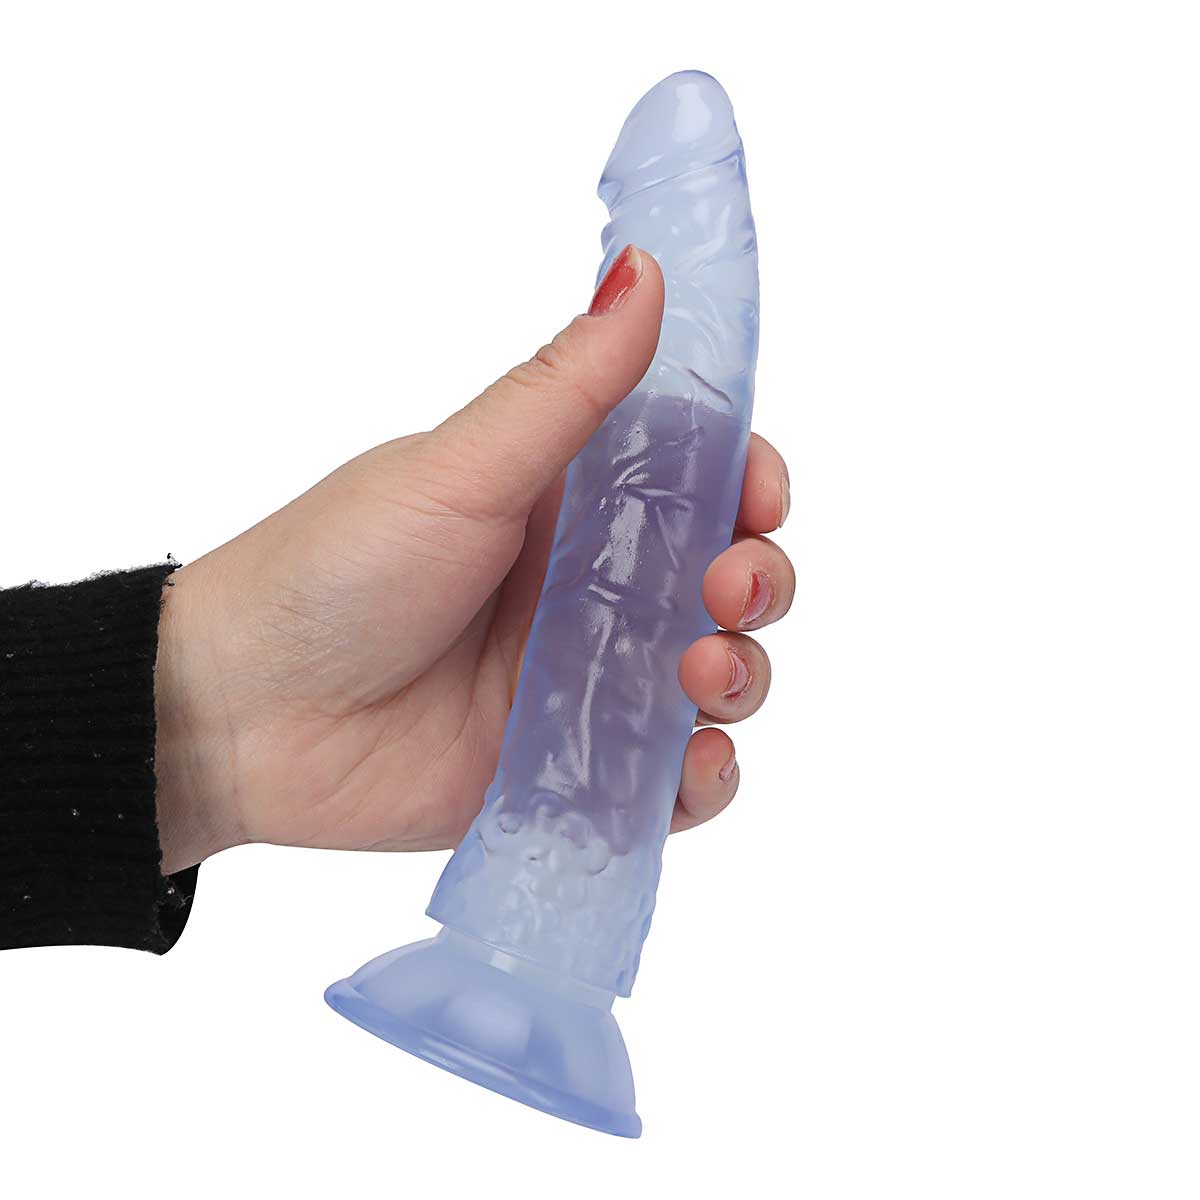 7.9 inches Multicolor color simulated penis